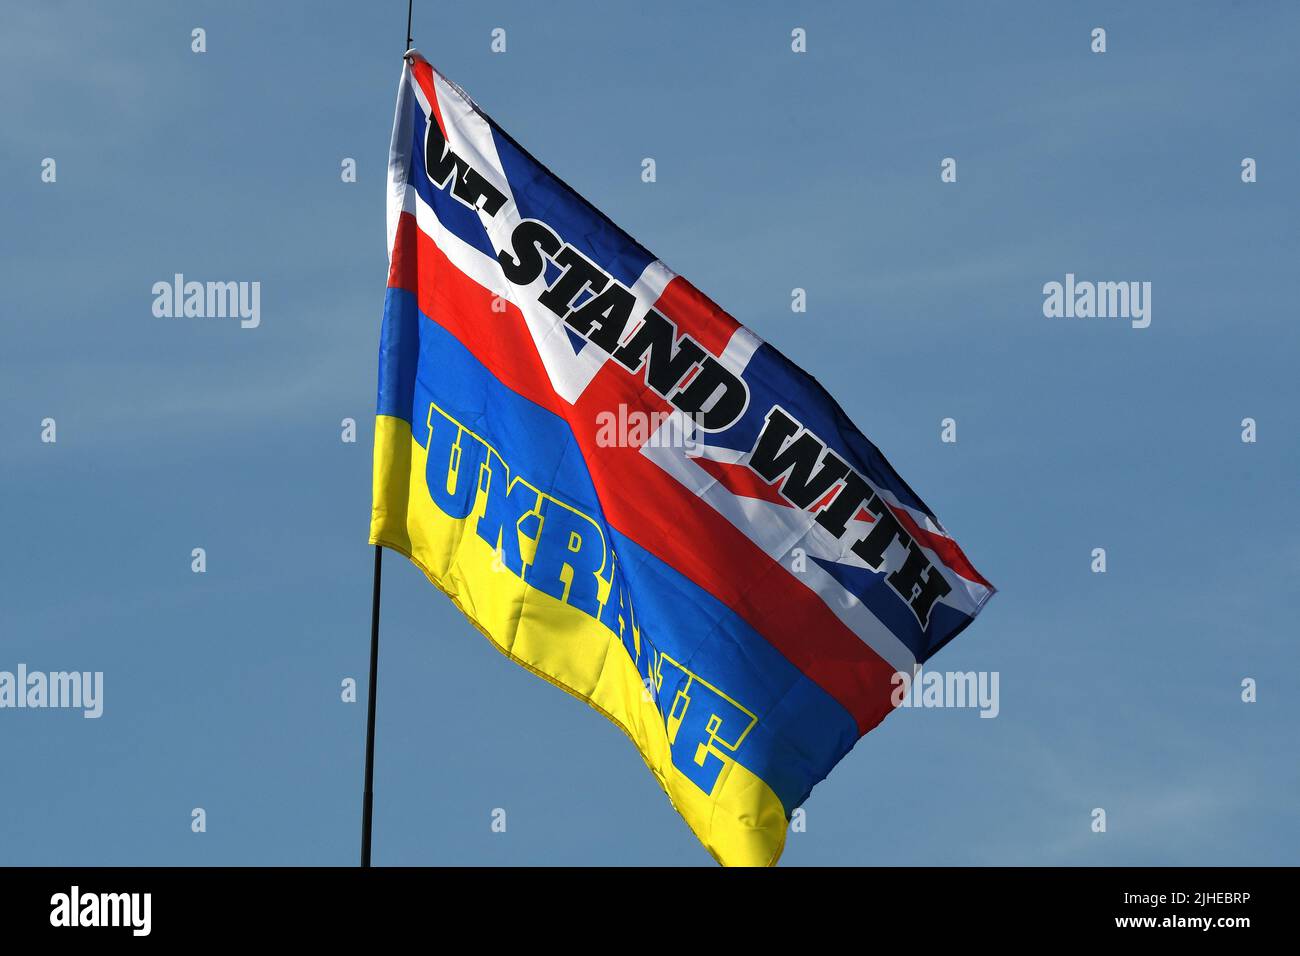 'WE STAND WITH UKRAINE', ON FLAG WITH UK AND UKRAINE INSIGNIA. Stock Photo